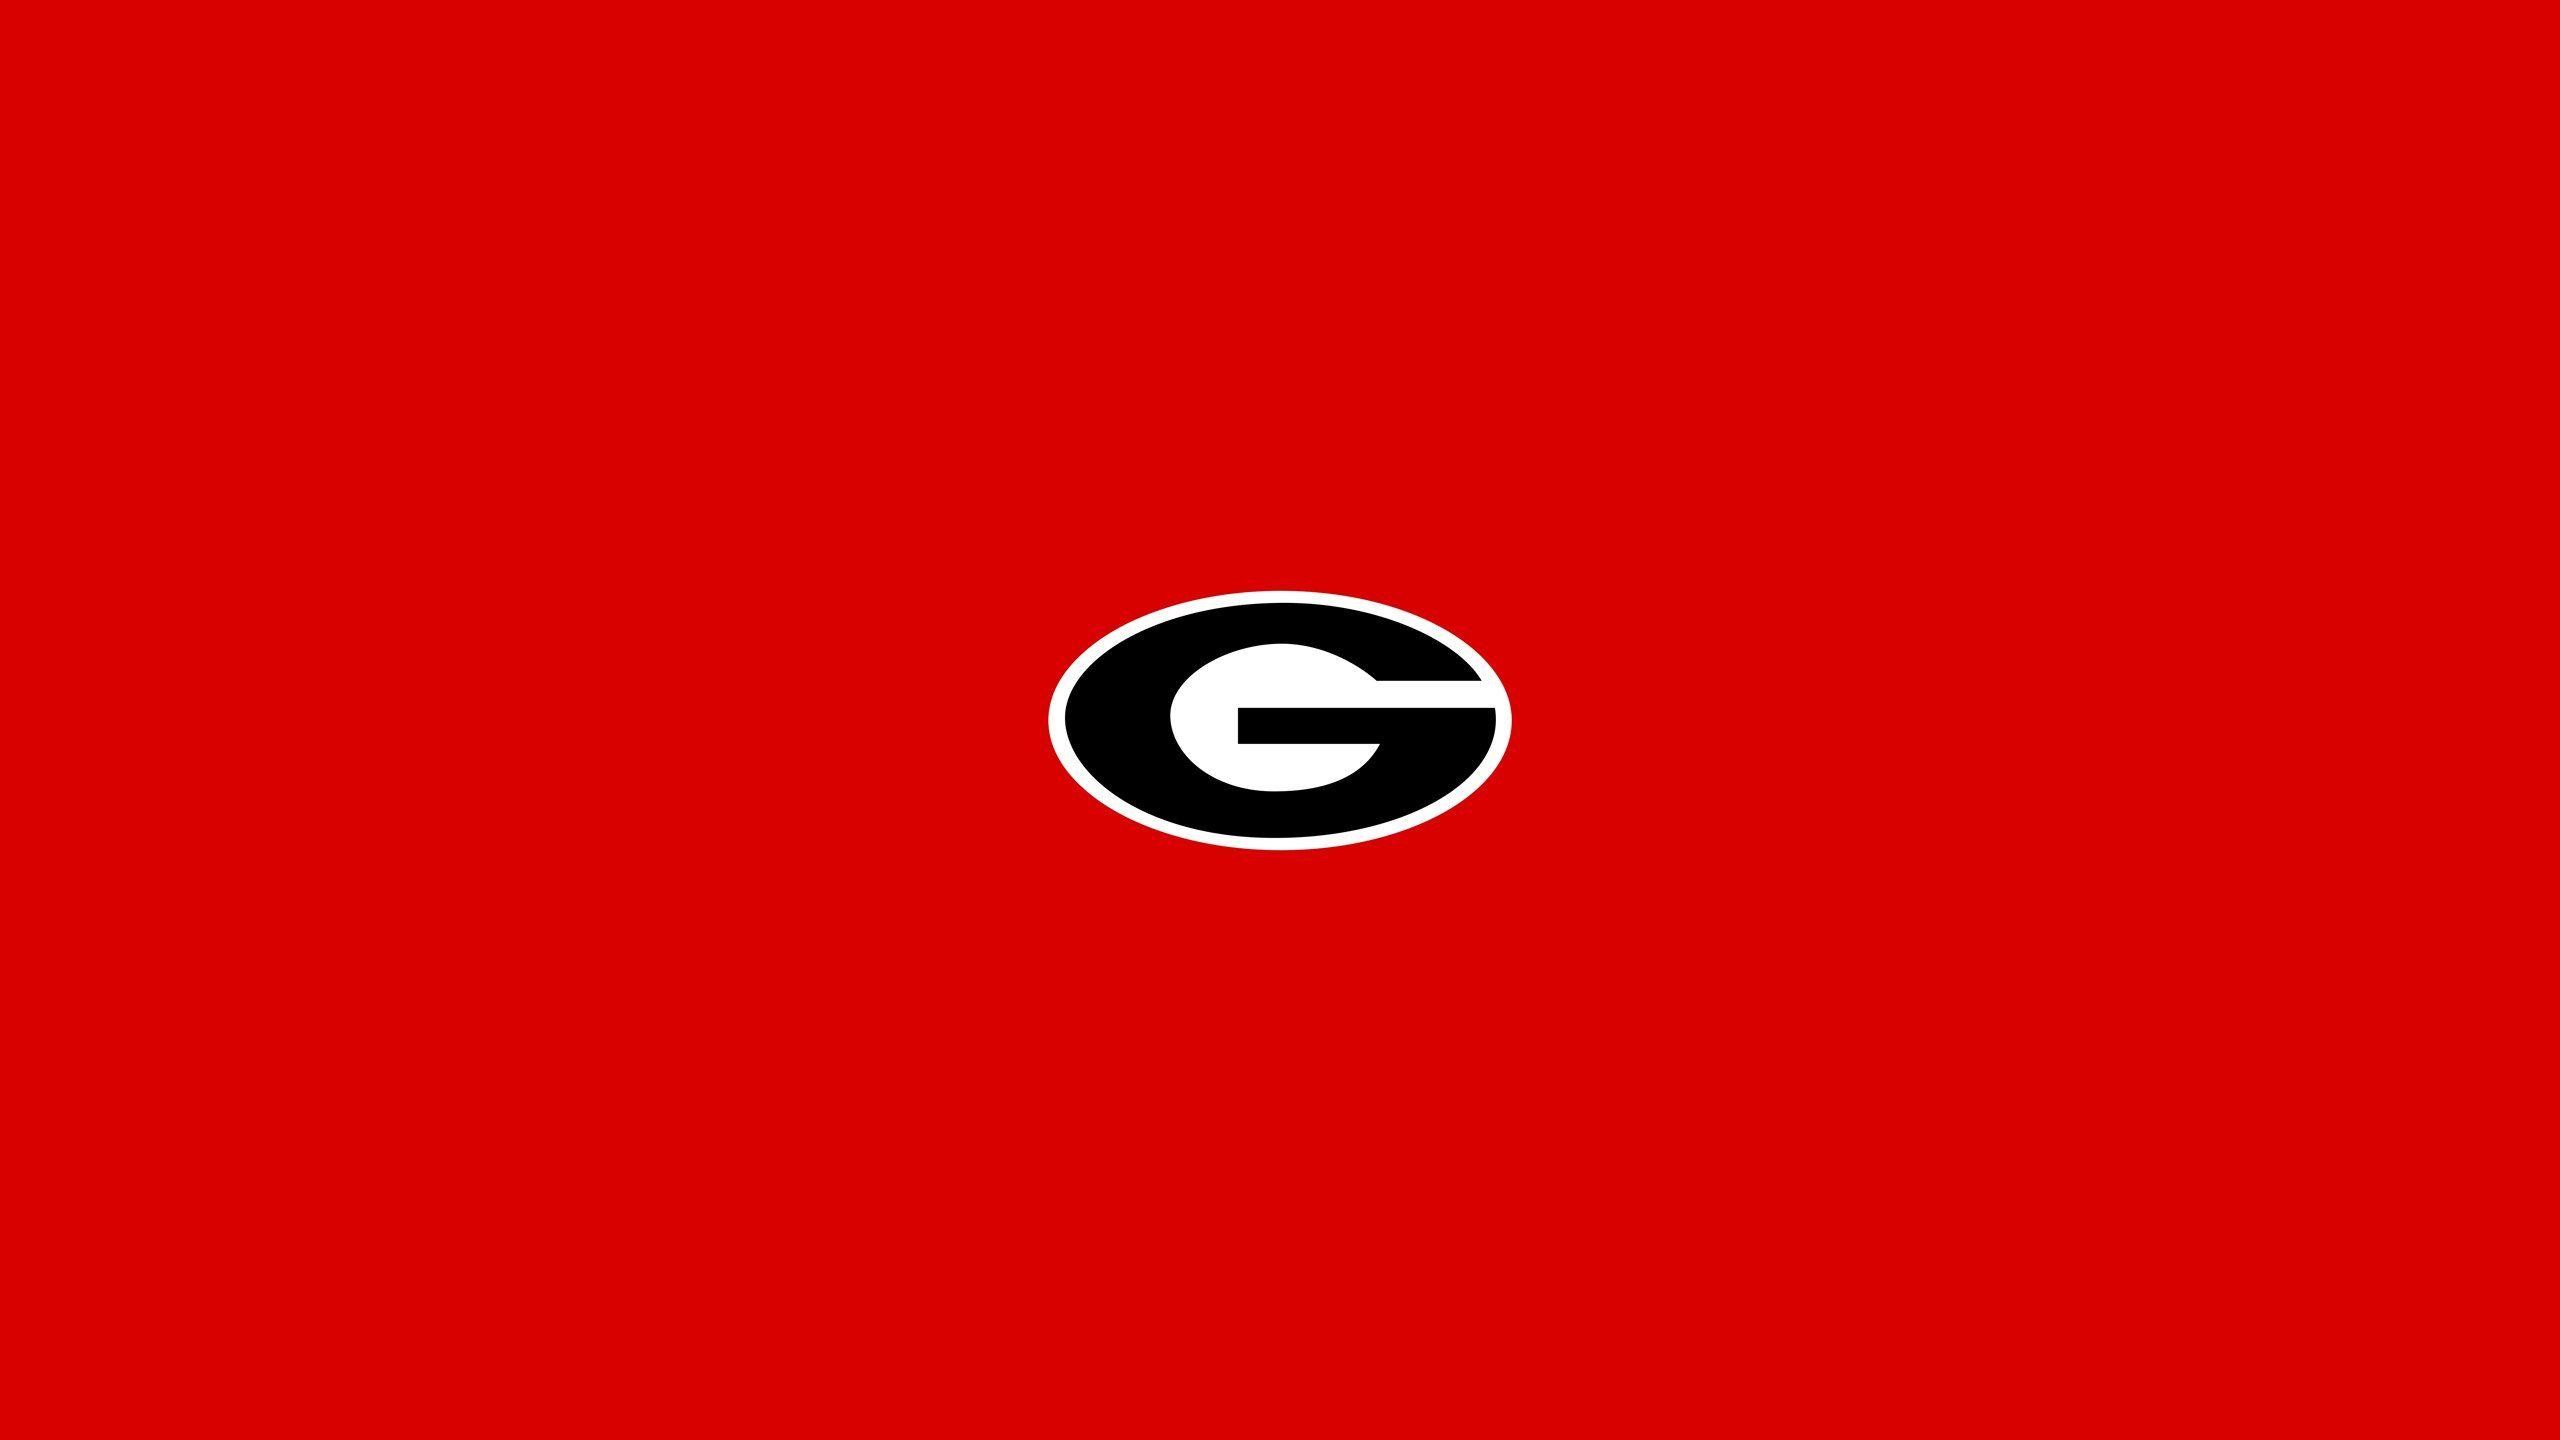 2560x1440 Georgia Bulldogs Wallpaper - HD Wallpapers Backgrounds of Your Choice